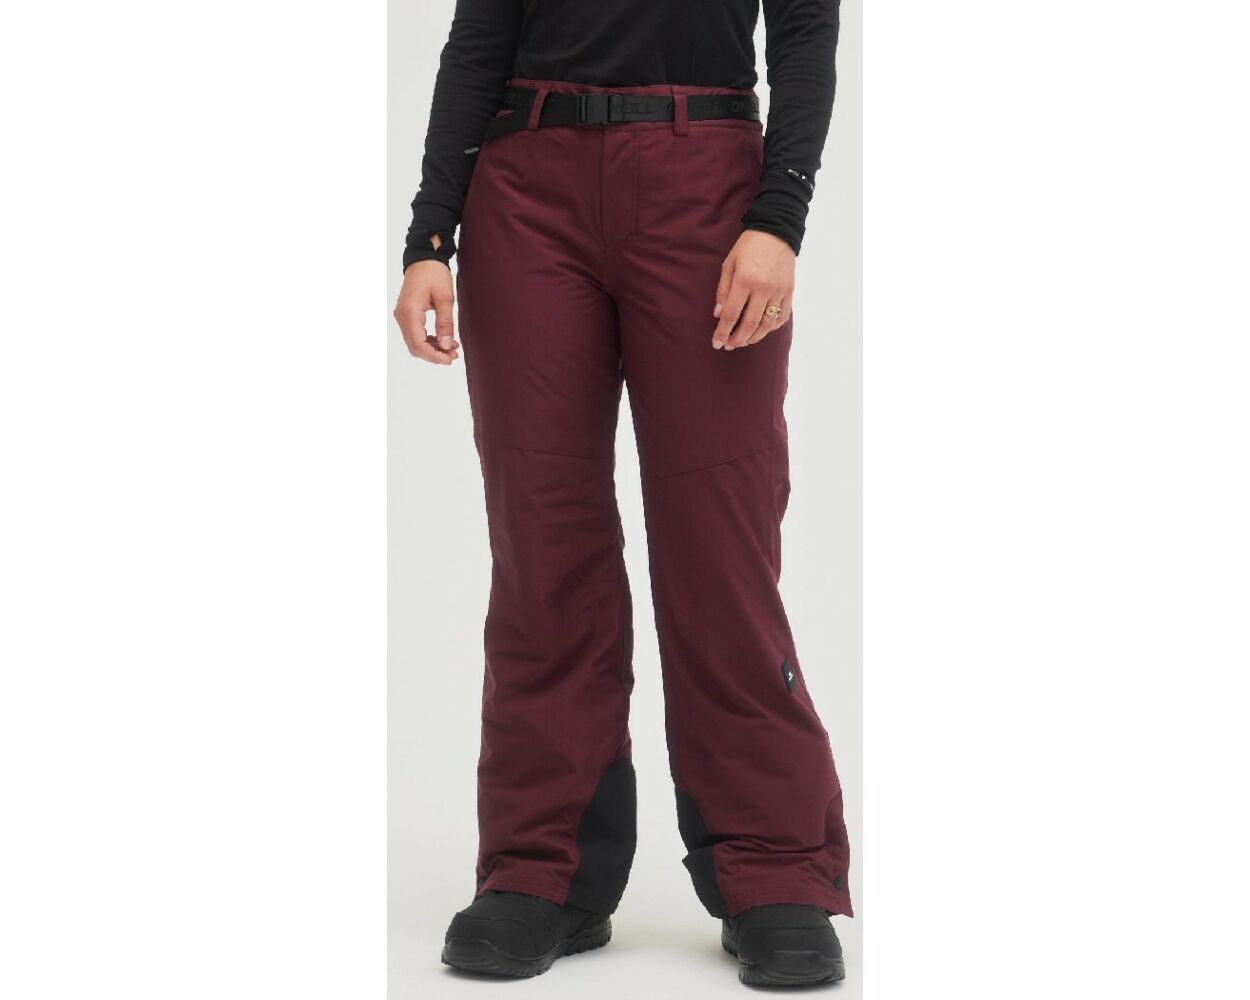 Women's Wine colored O'Neill Snow pants Front